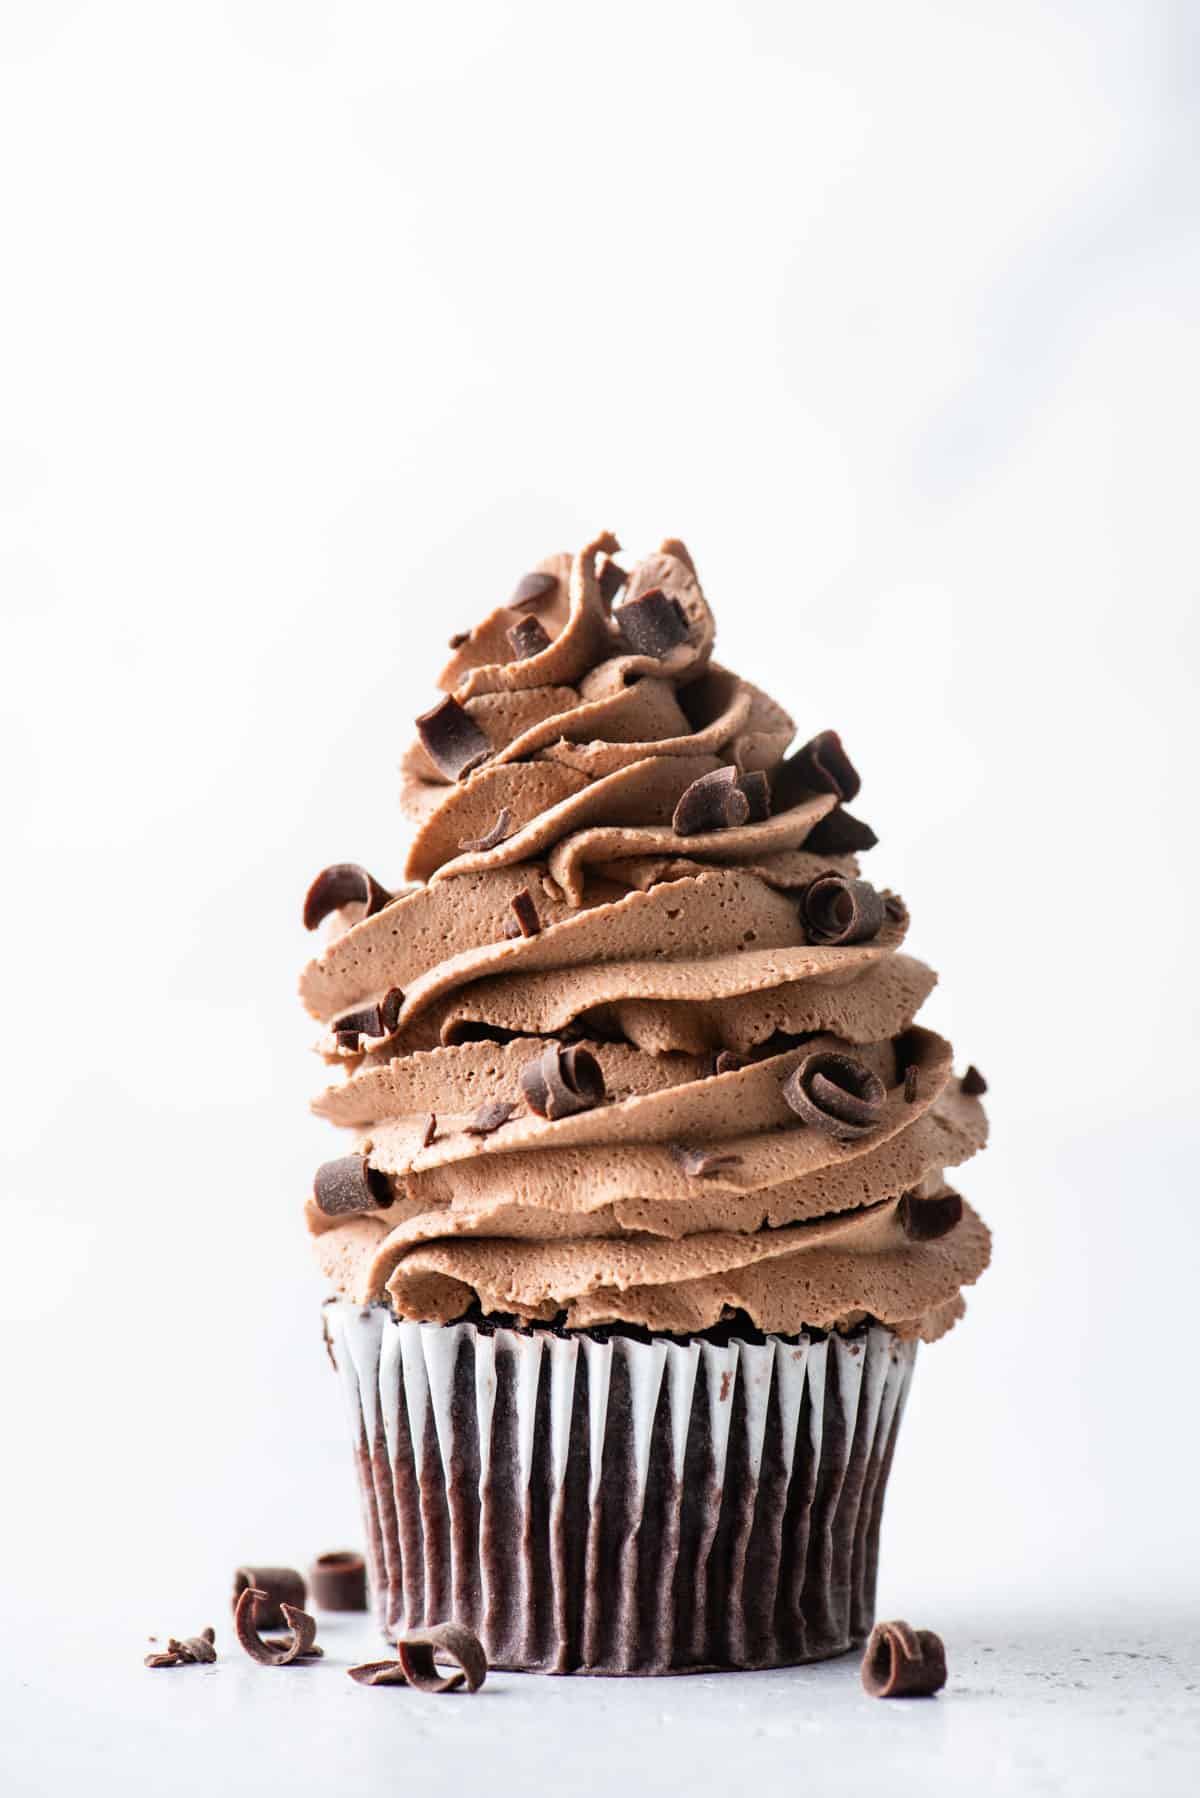 chocolate whipped cream piped onto chocolate cupcakes with chocolate shavings sprinkled on top